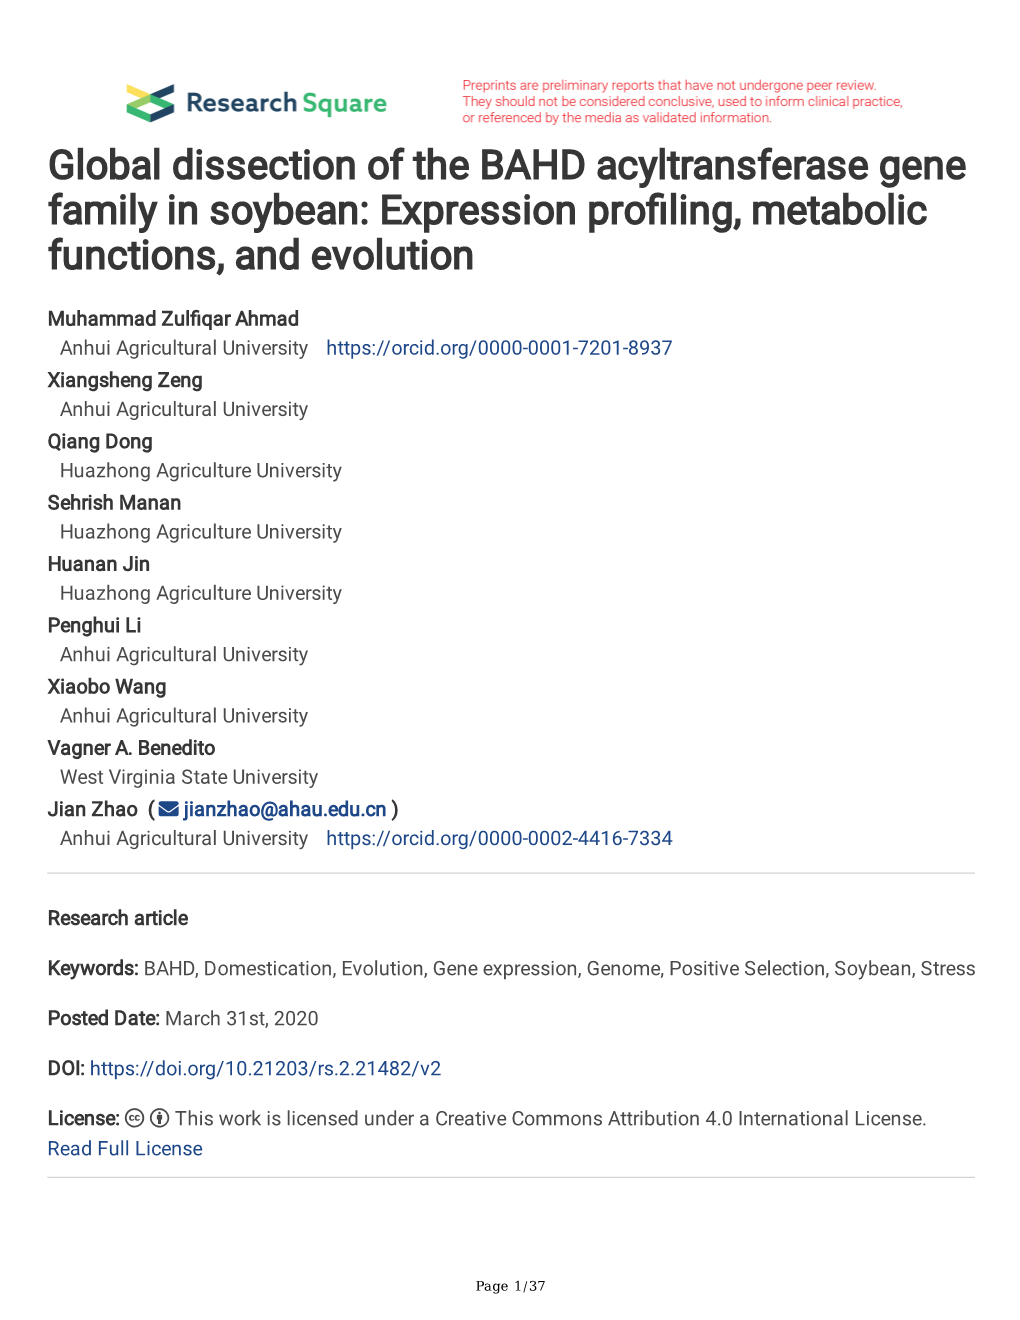 Global Dissection of the BAHD Acyltransferase Gene Family in Soybean: Expression Profling, Metabolic Functions, and Evolution